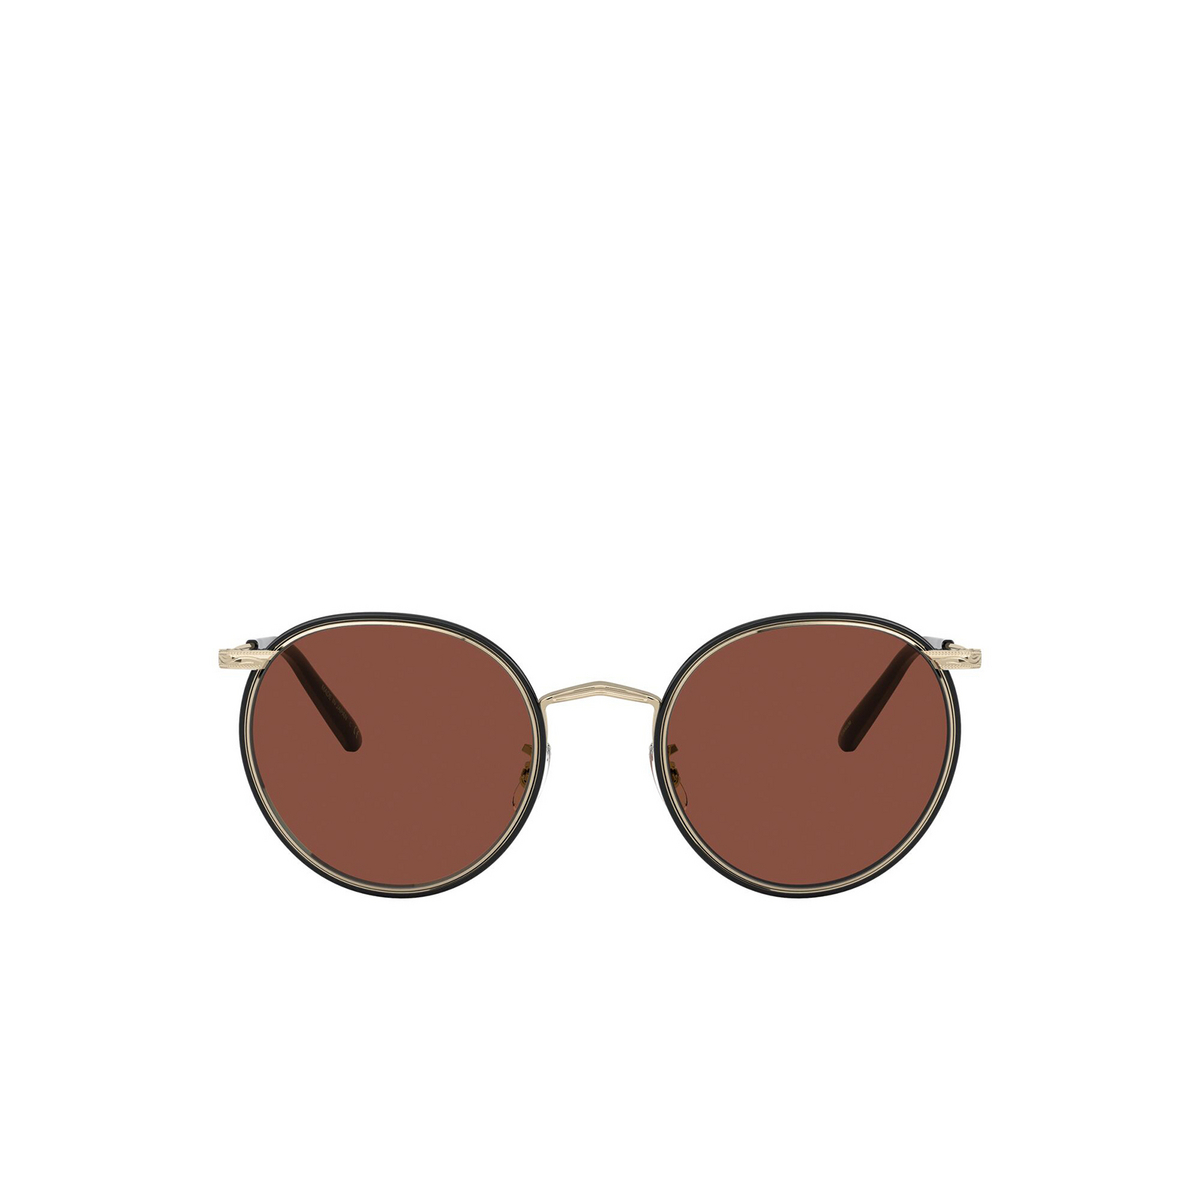 Oliver Peoples® Round Sunglasses: Casson OV1269ST color Soft Gold / Black 5035C5 - front view.